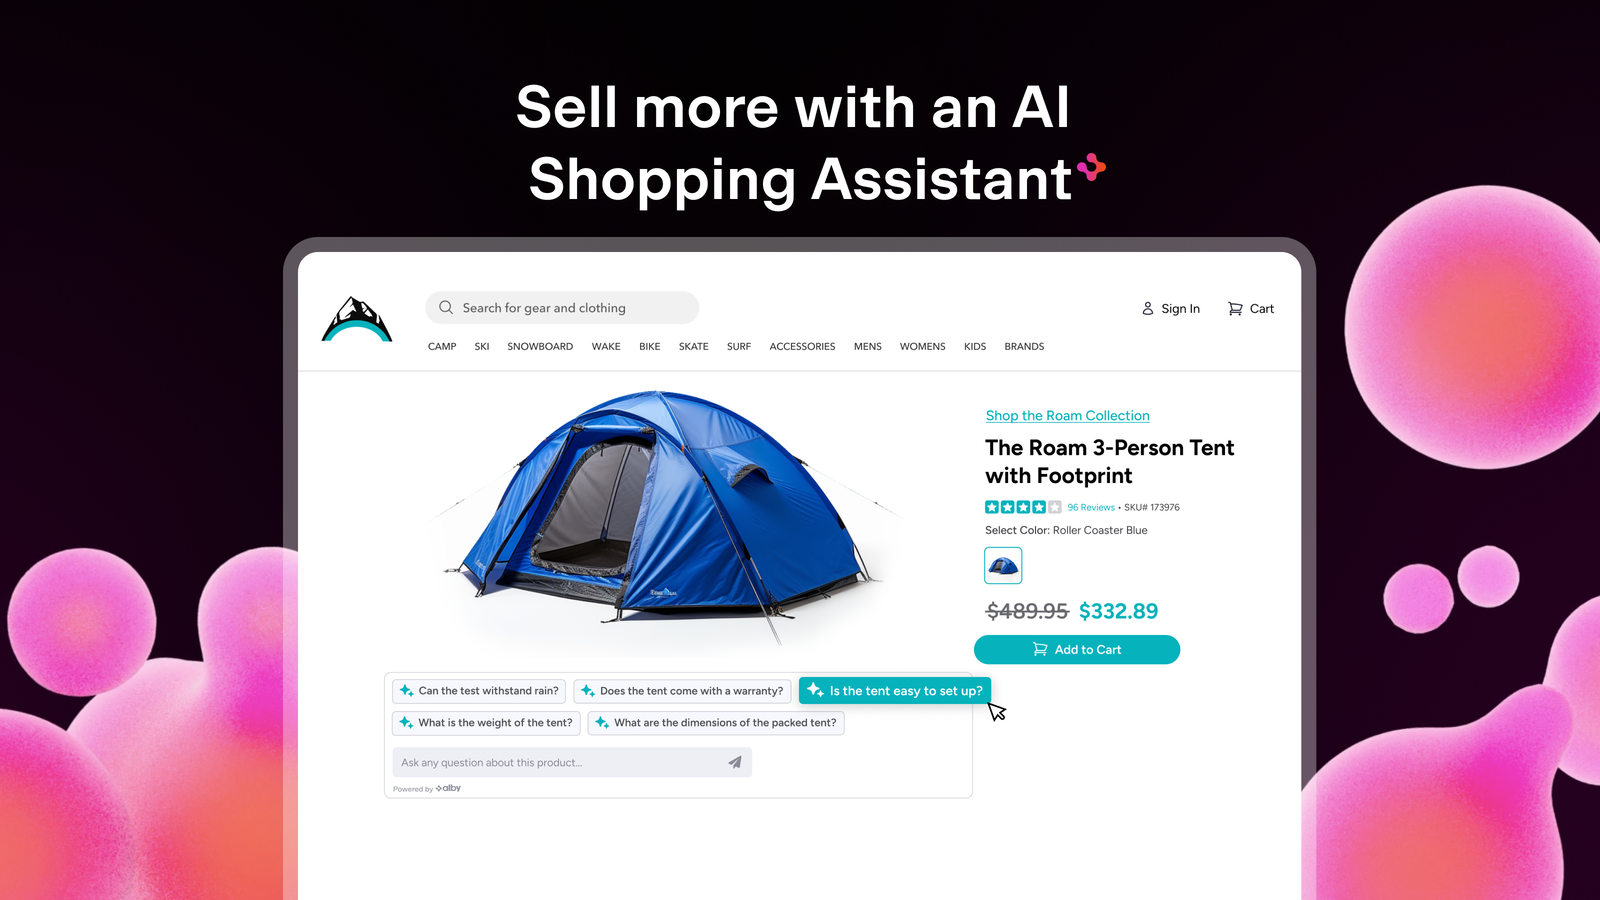 Sell more with an AI Shopping Assistant